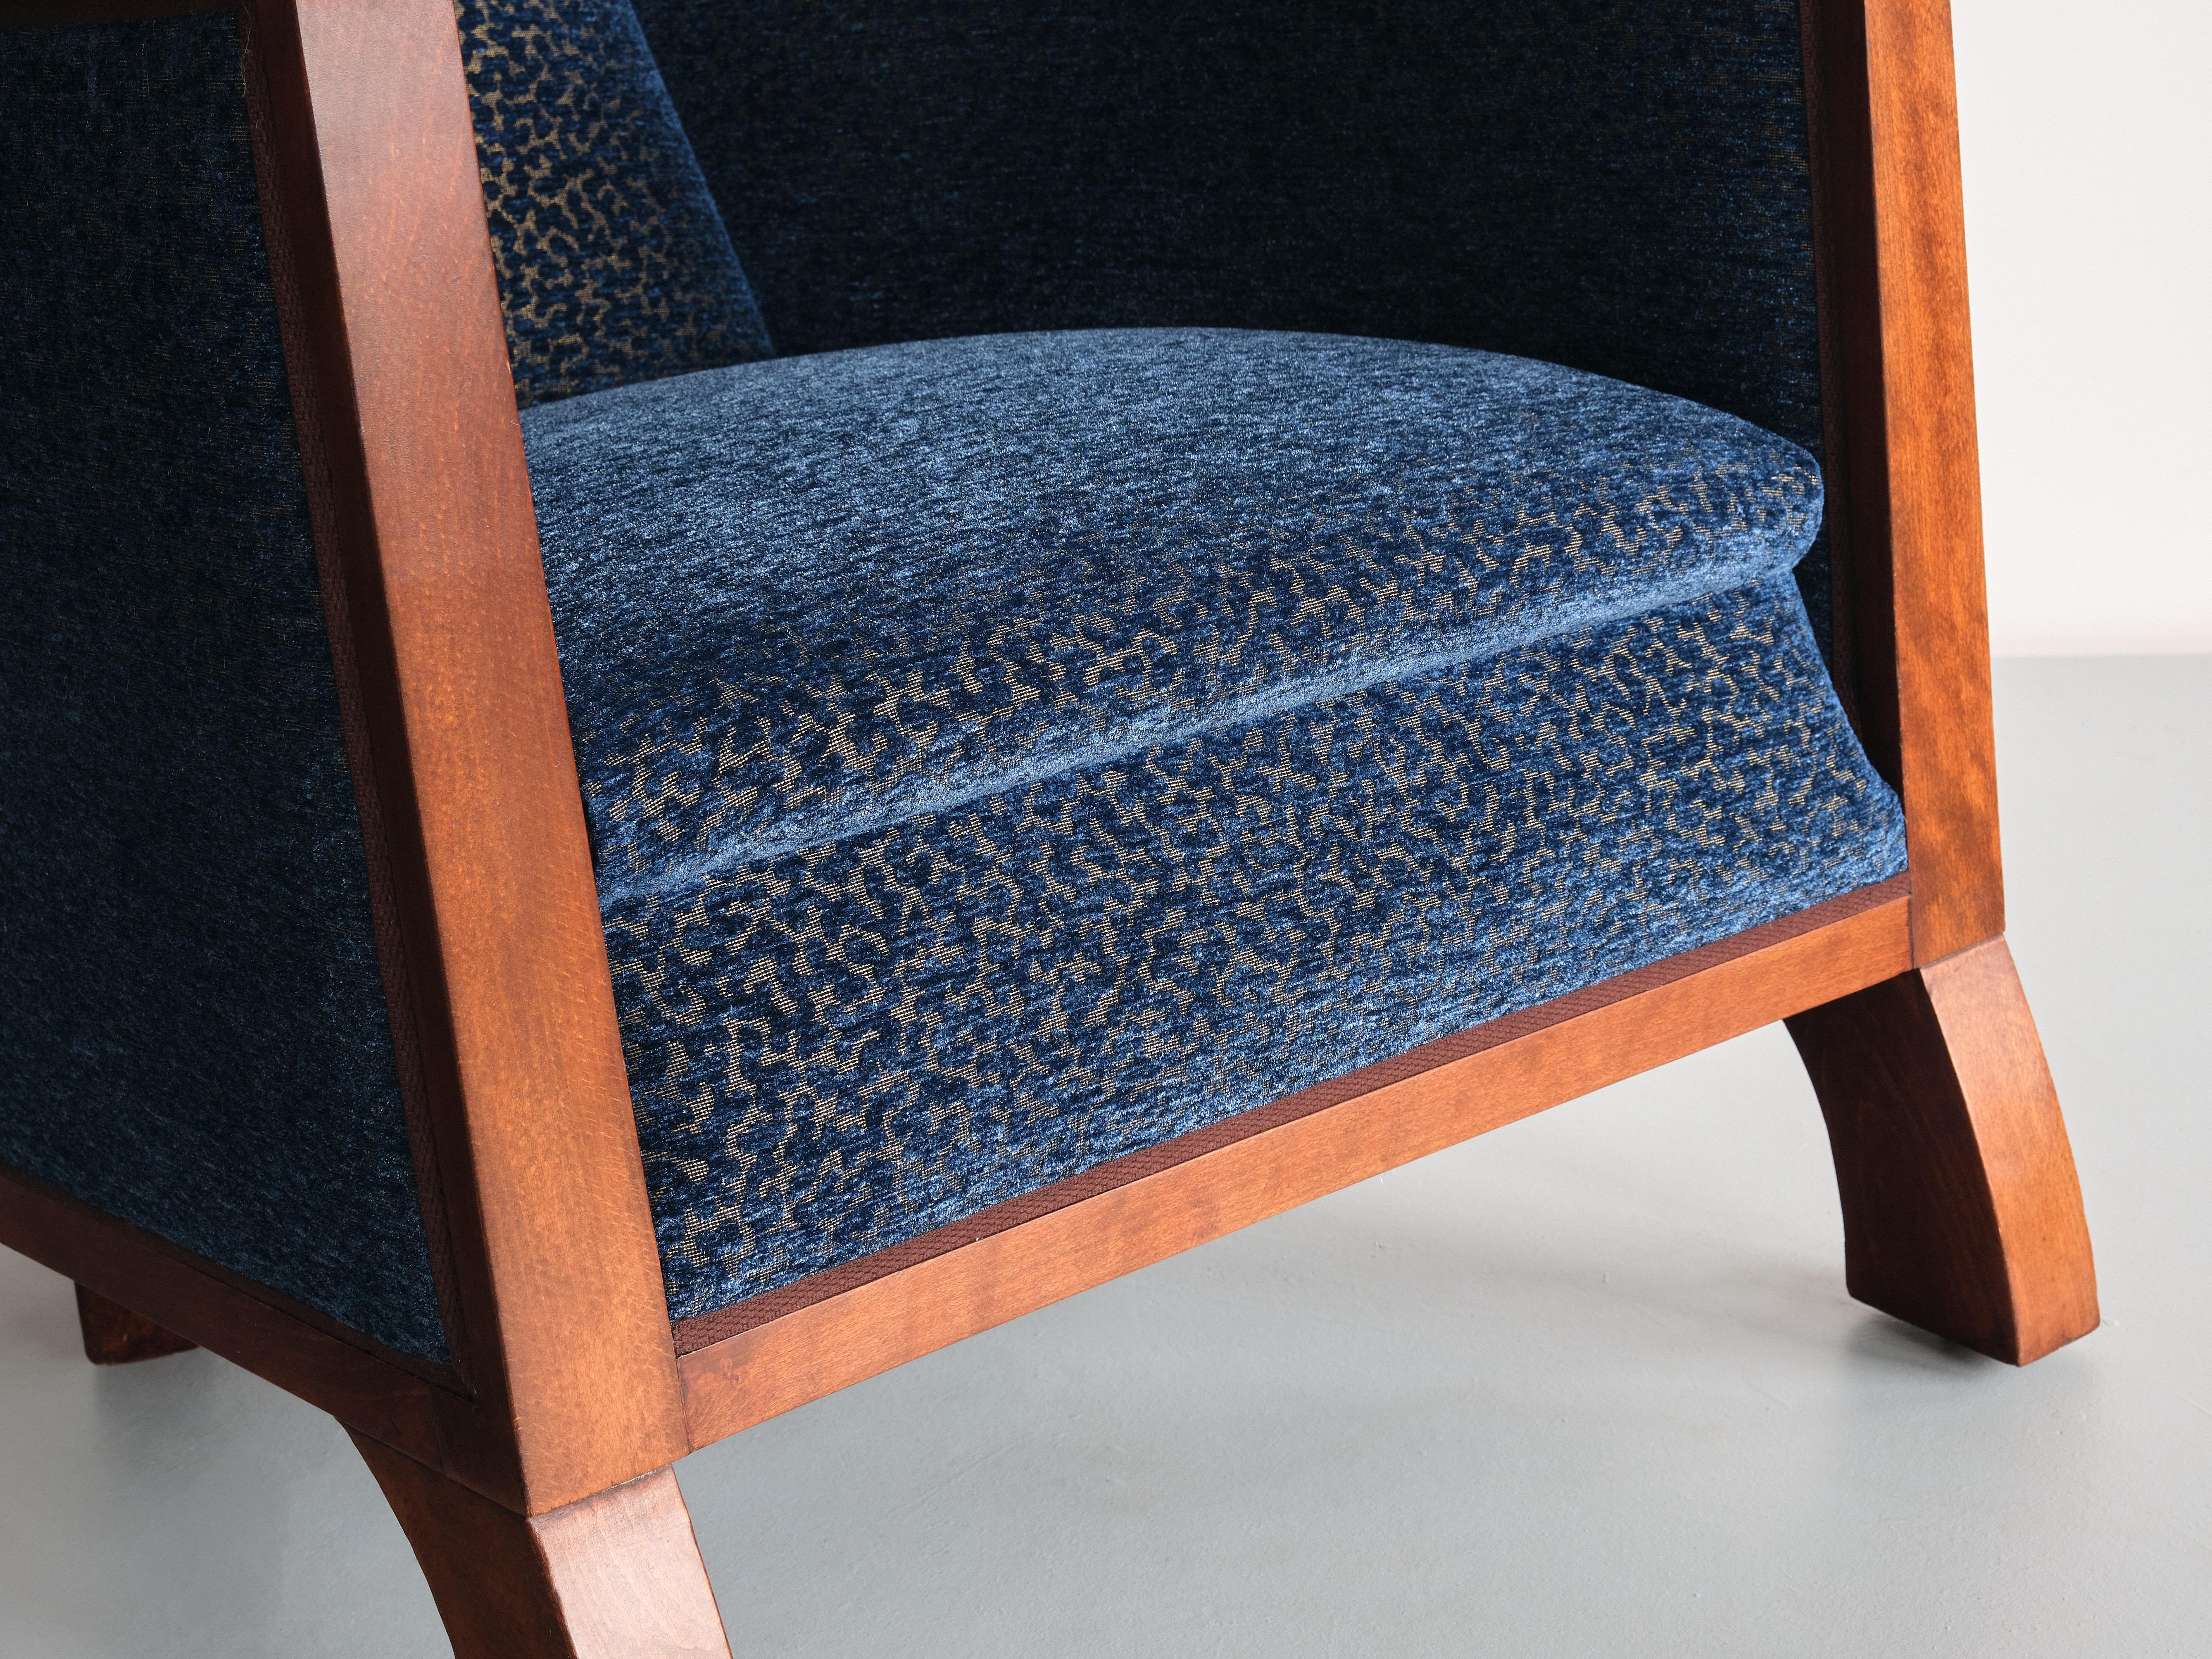 Exceptional Art Deco Arm Chair in Blue Velvet and Maple, Northern France, 1920s For Sale 2